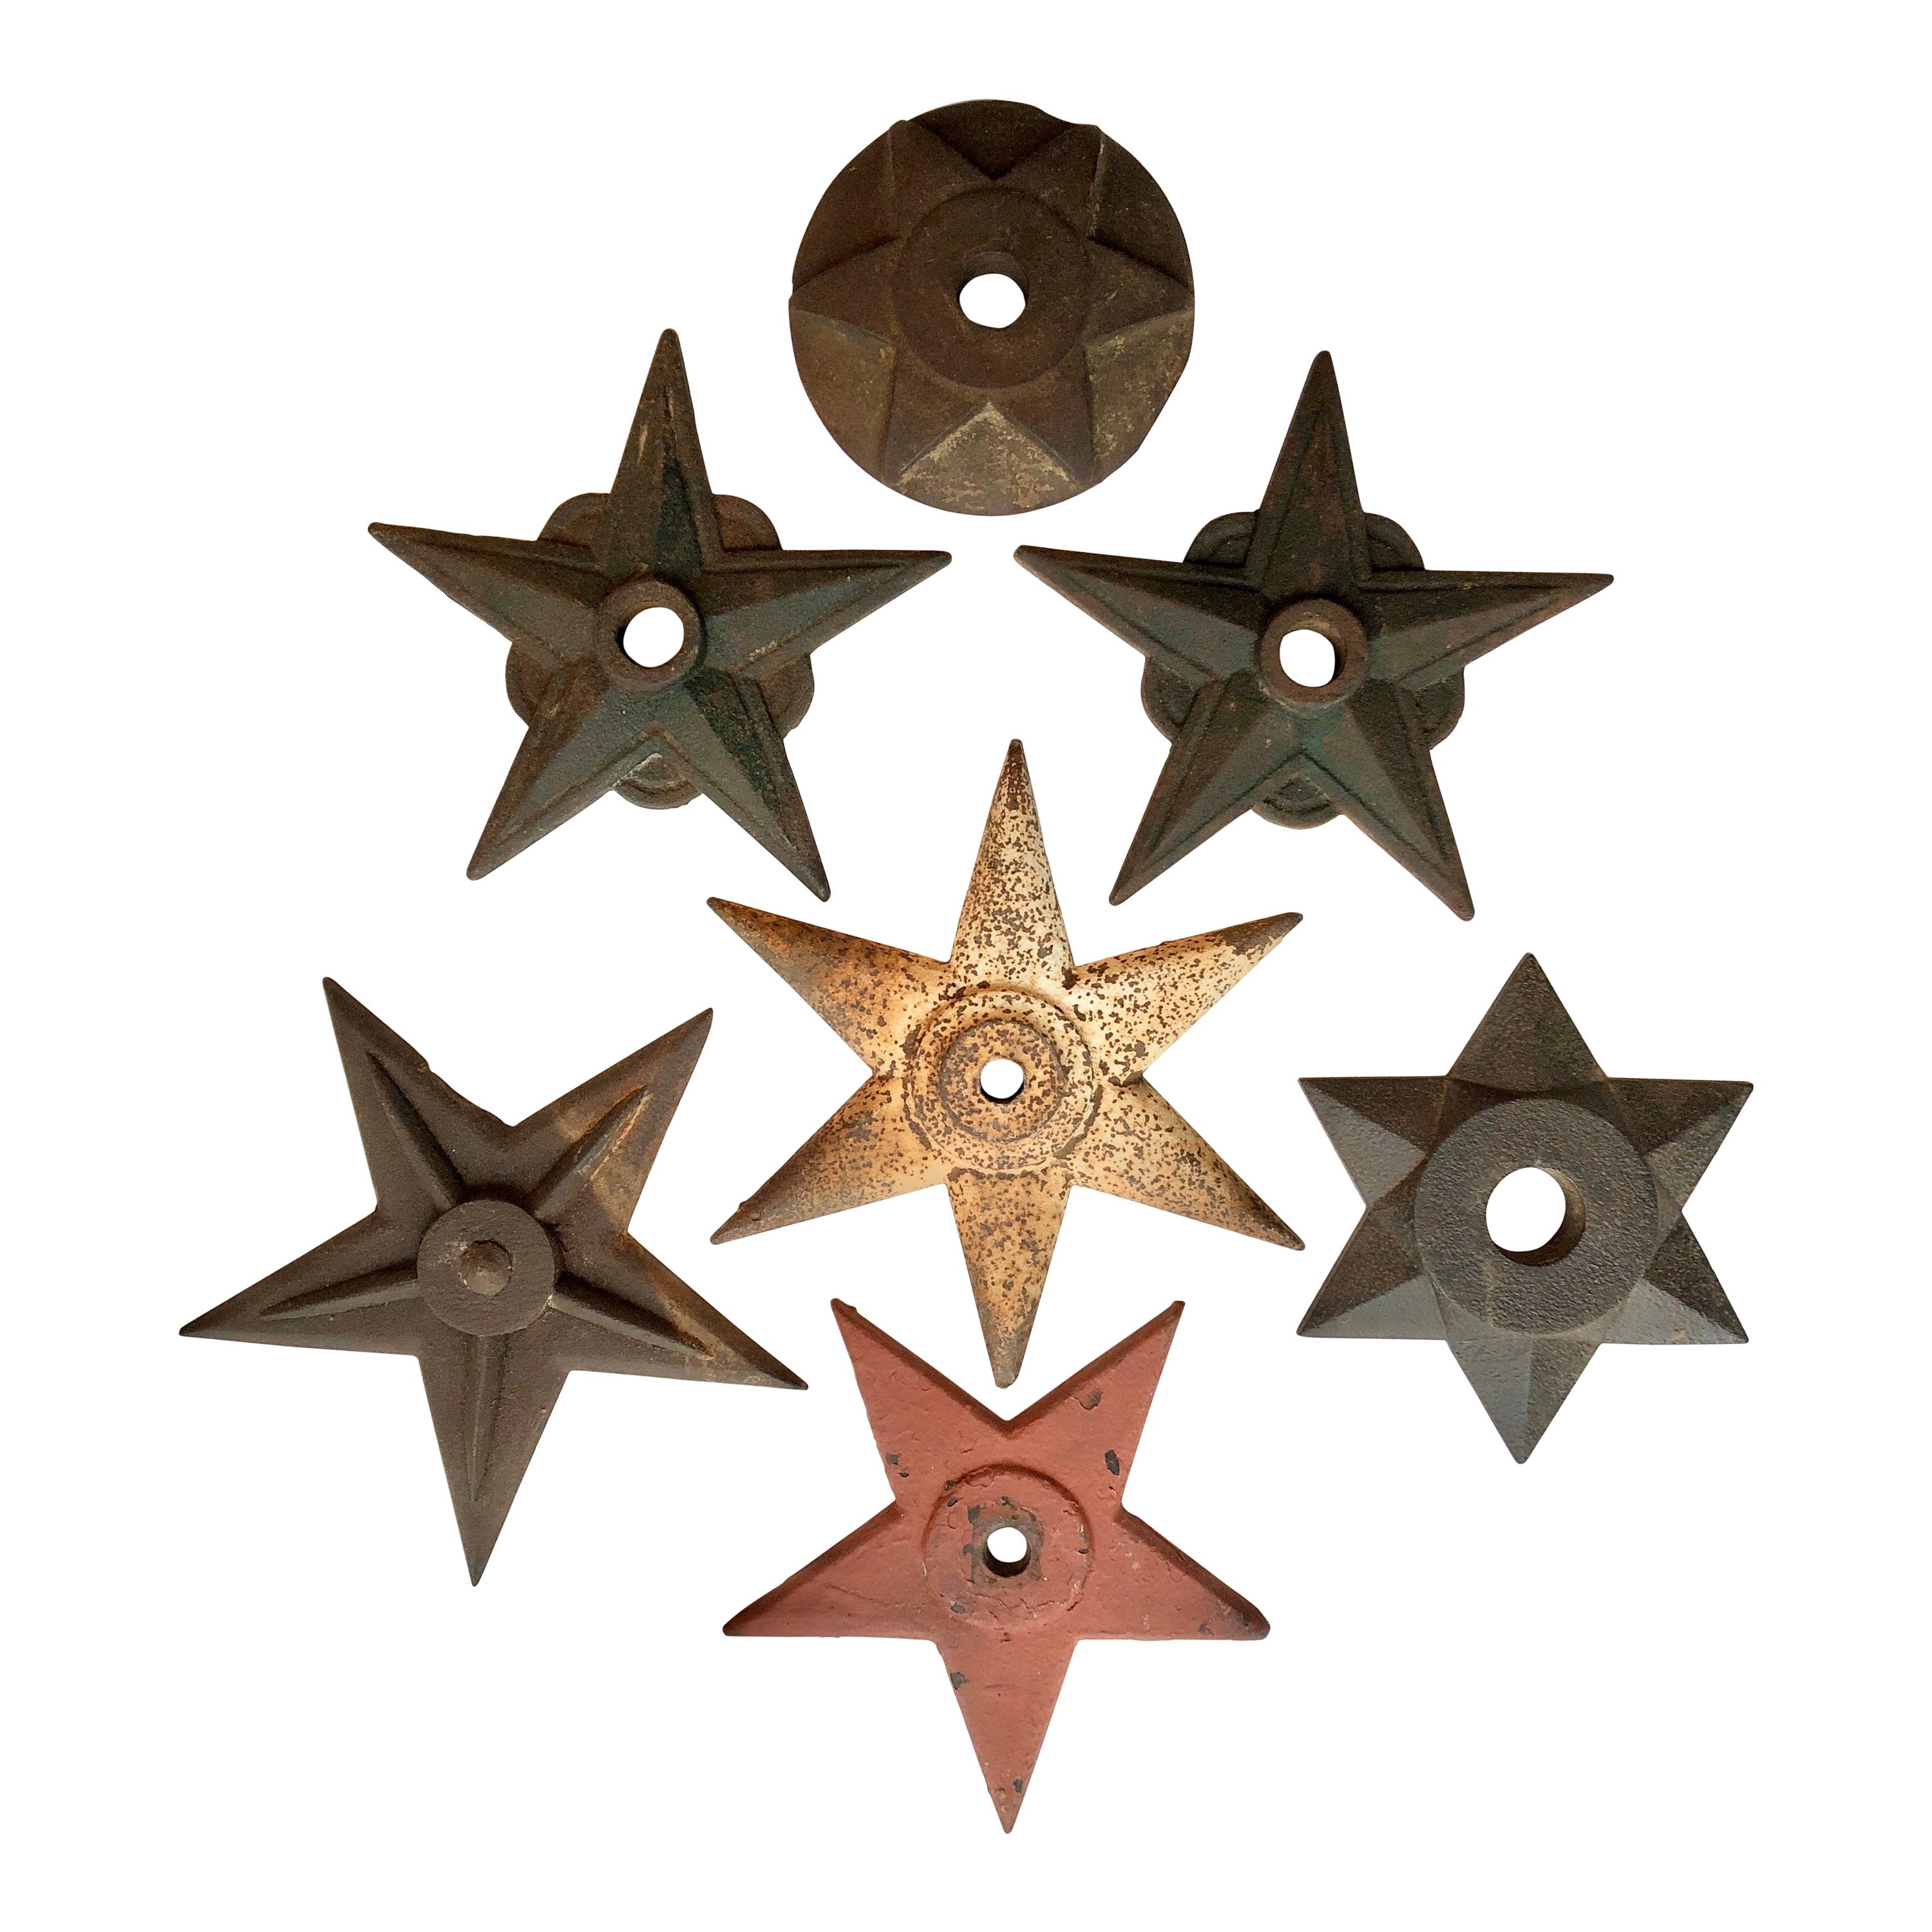 Antique Cast Iron Architectural Building Star Shaped Support Collection '7'